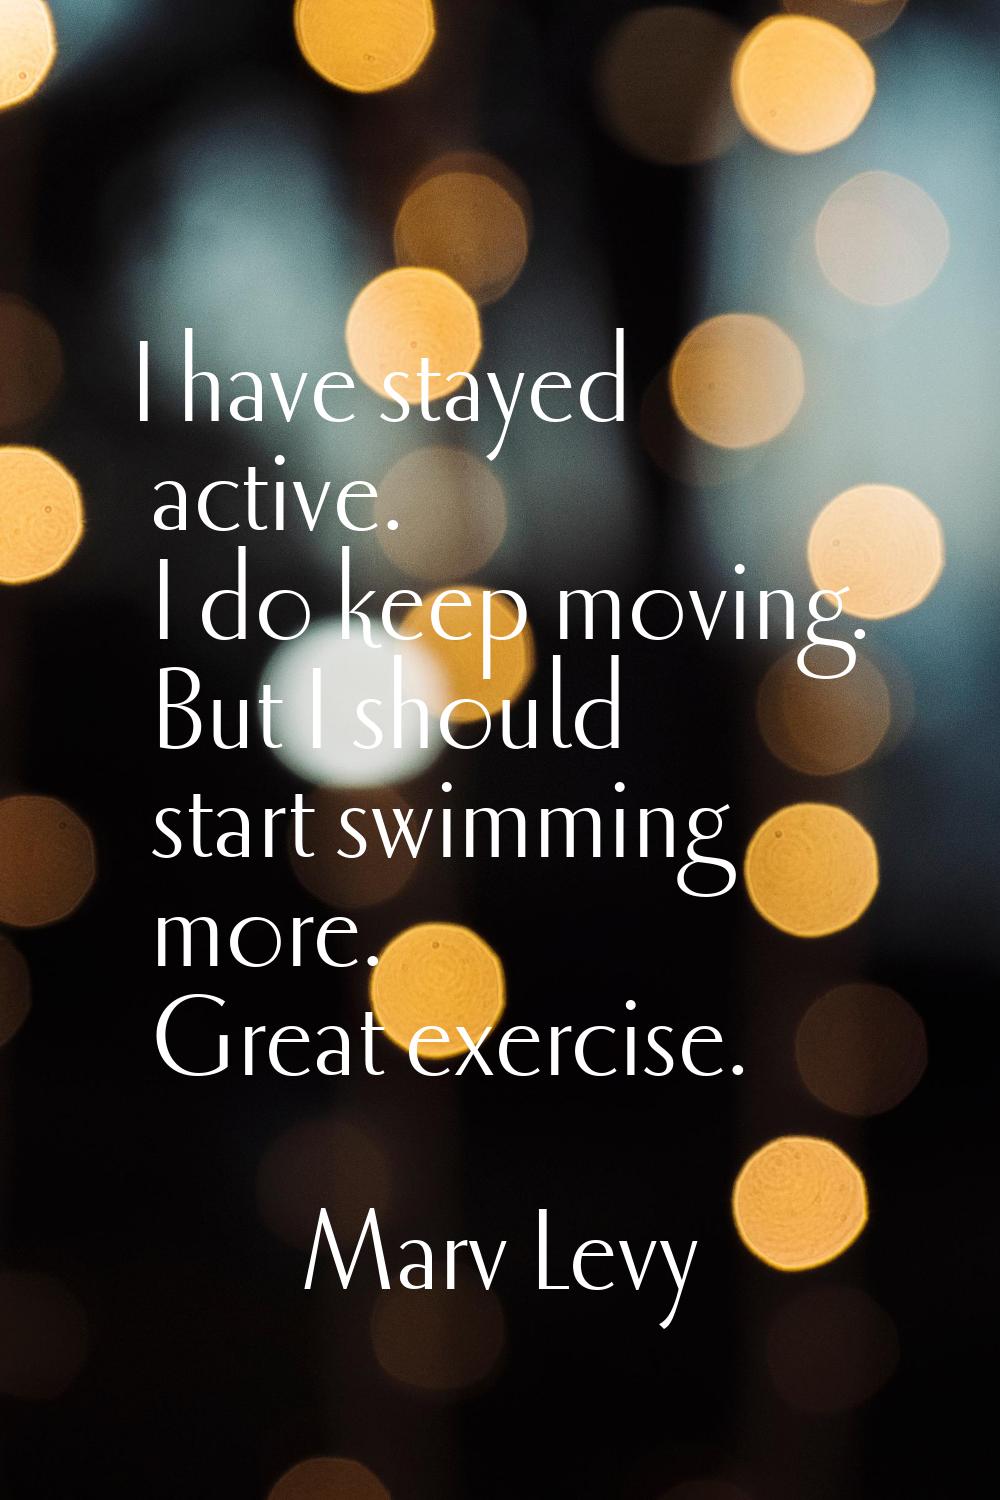 I have stayed active. I do keep moving. But I should start swimming more. Great exercise.